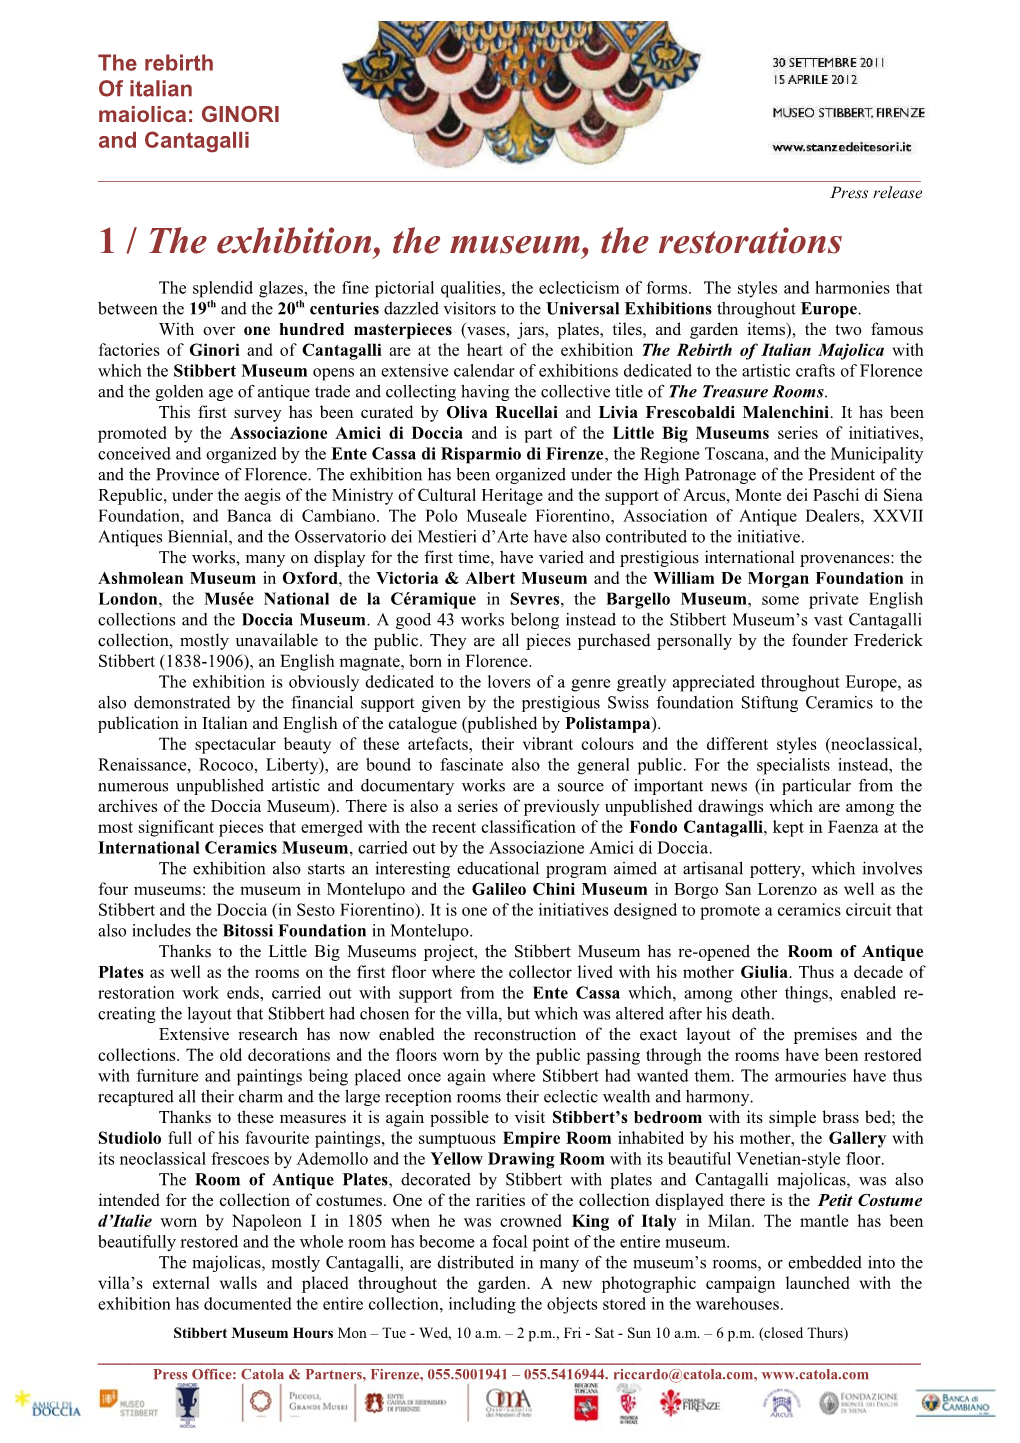 1 / the Exhibition, the Museum, the Restorations